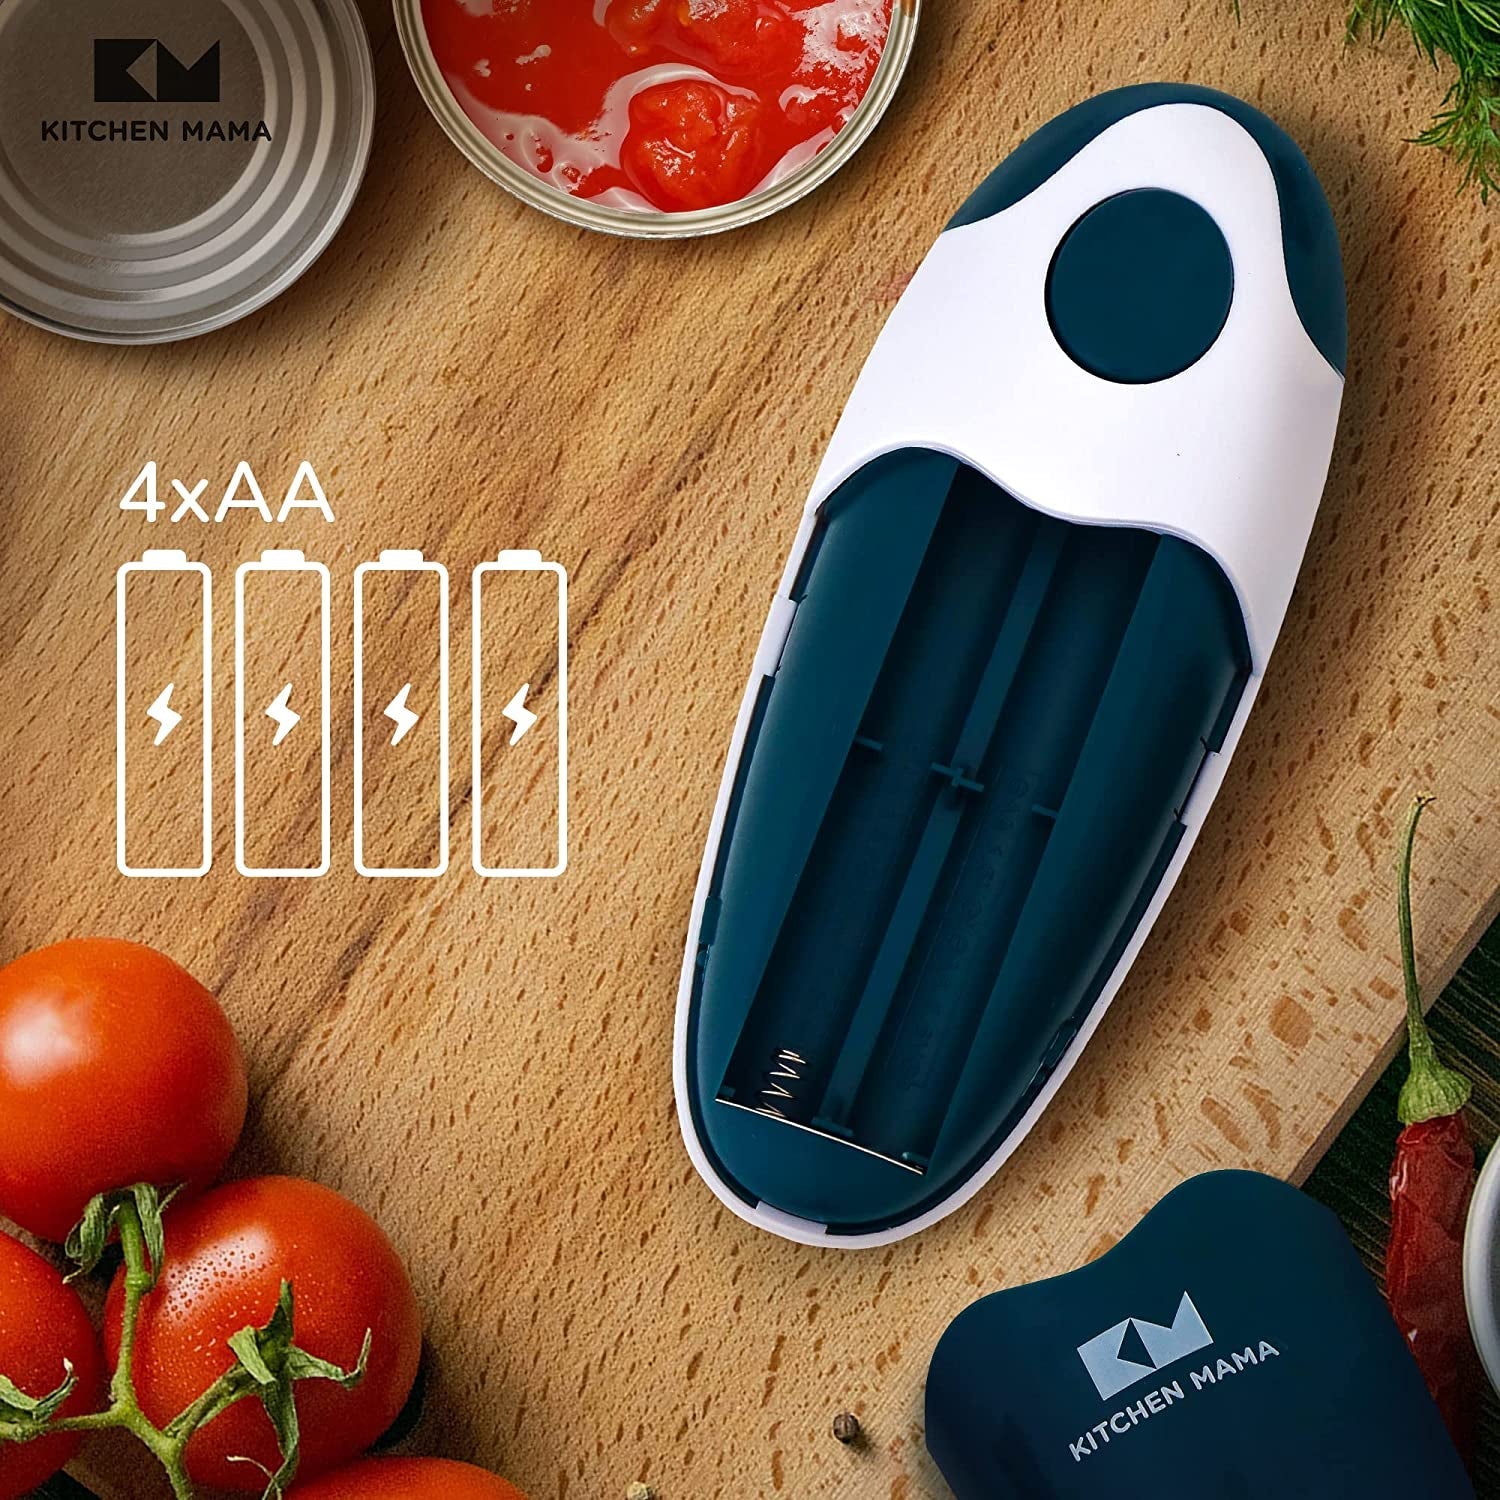 Kitchen Mama Auto 2.0 Electric Can Opener - Battery Operated, Smooth Edge, Open Almost Any Can, Navy Blue